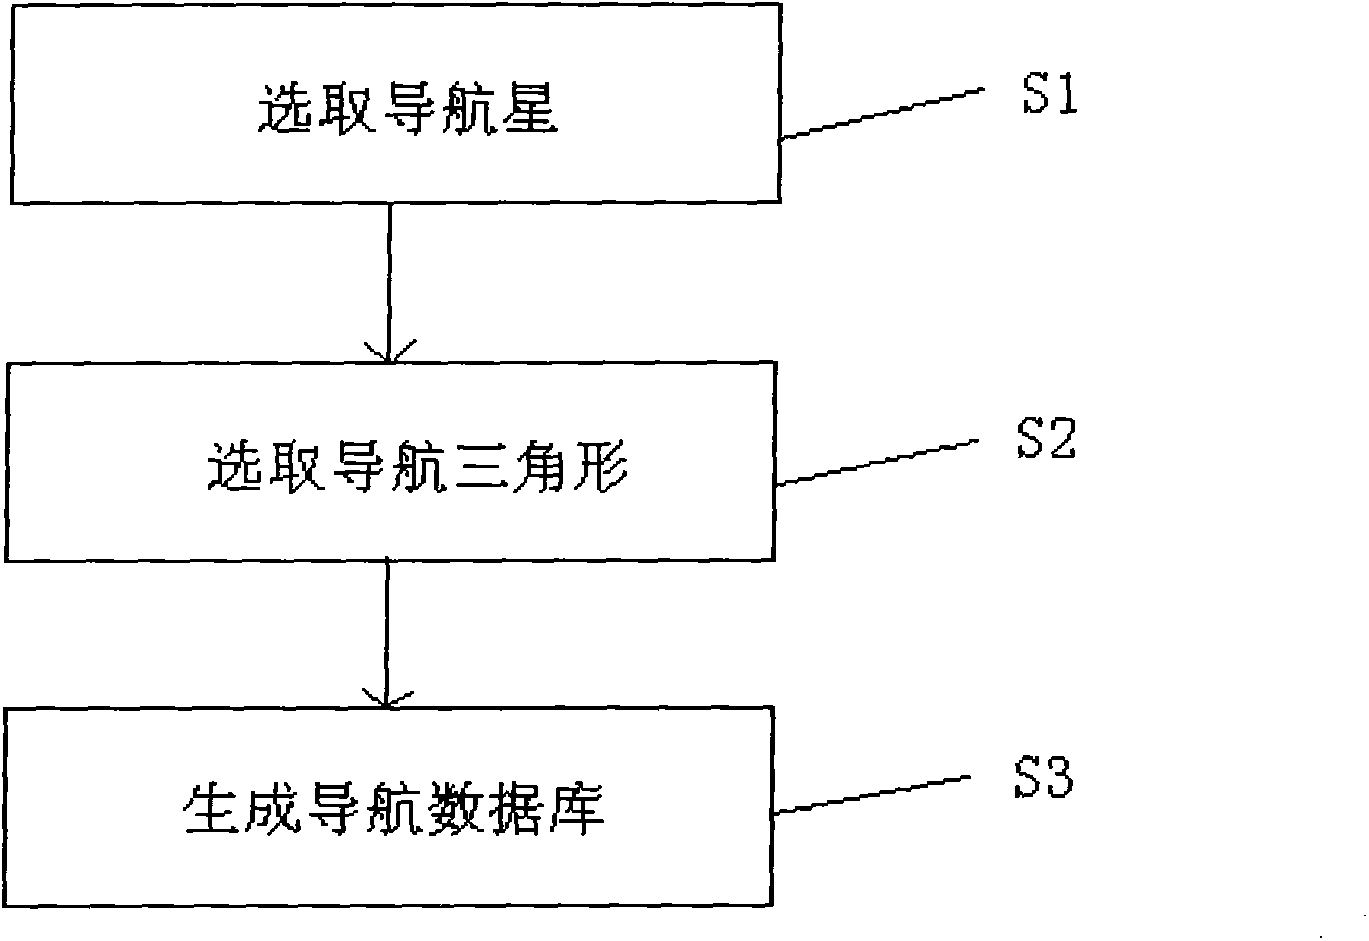 Navigation database building method applicable to high level background star pattern recognition